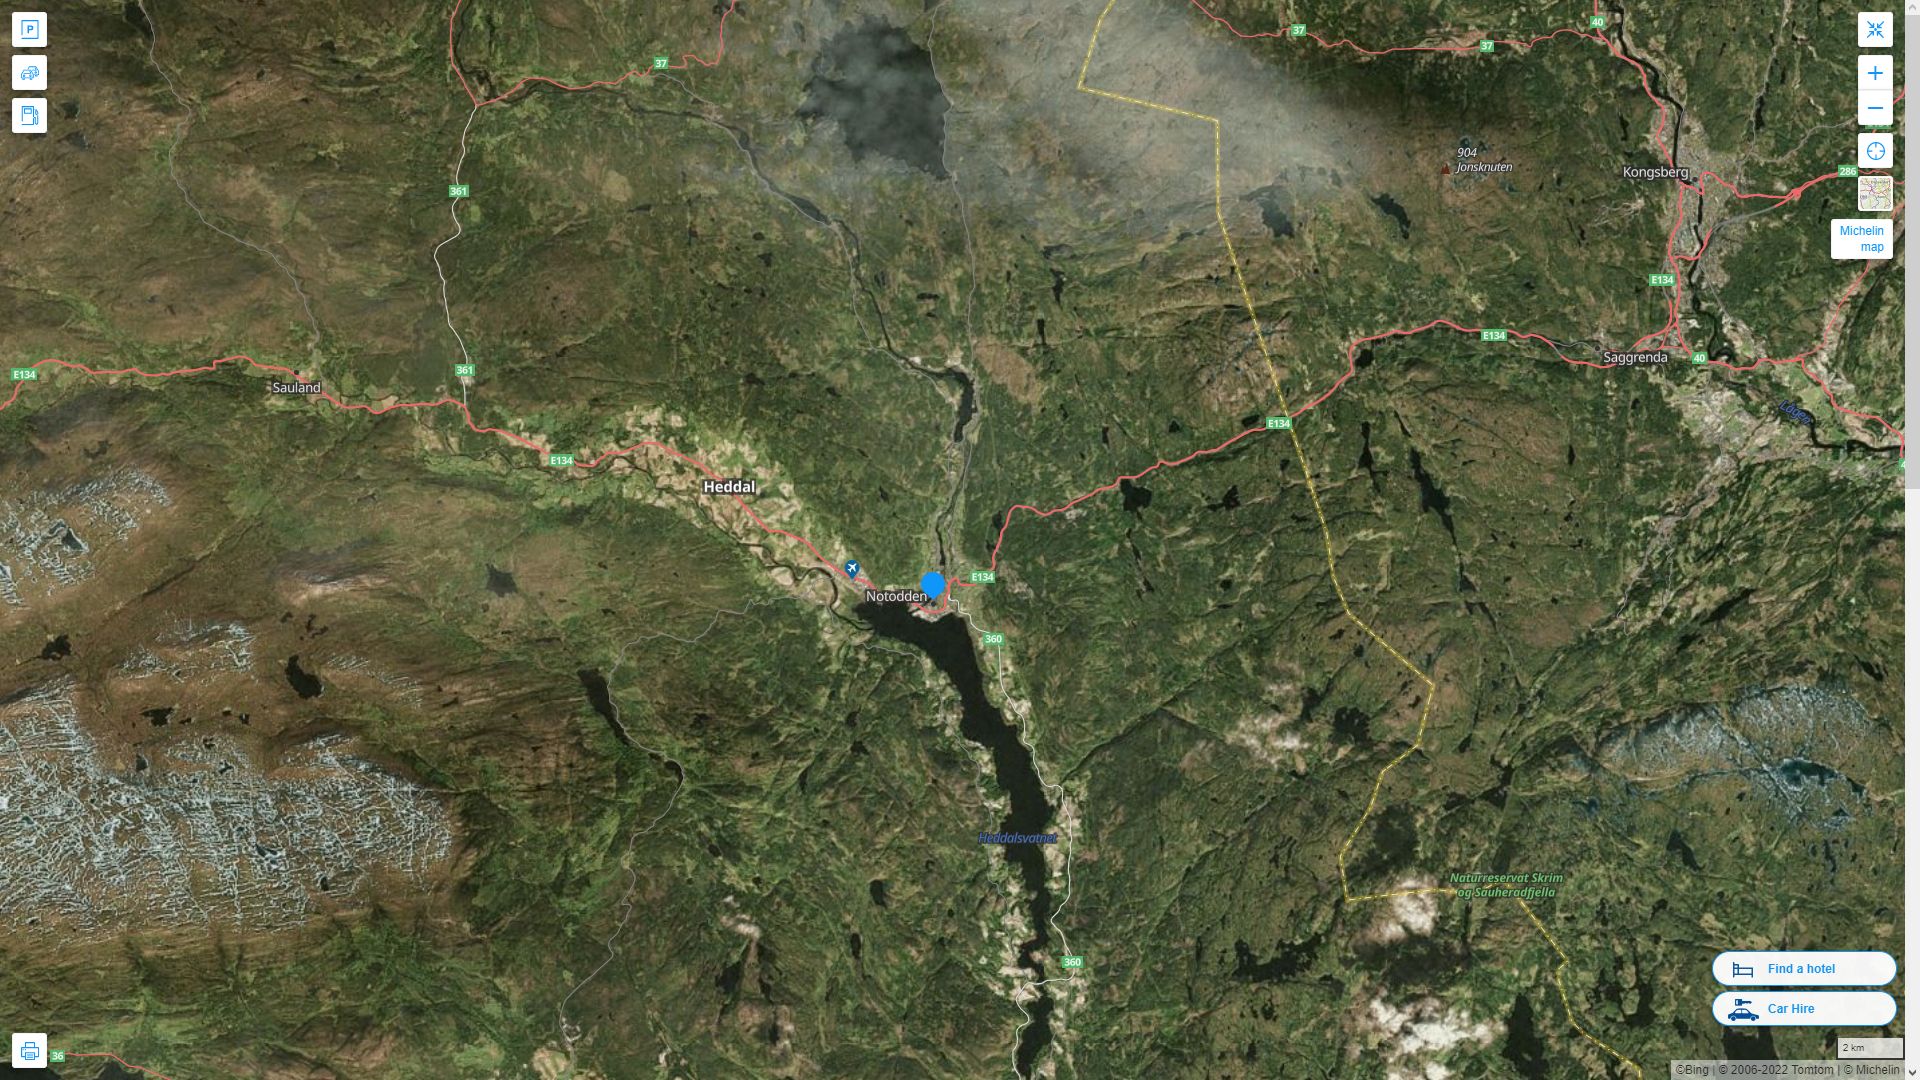 Notodden Highway and Road Map with Satellite View